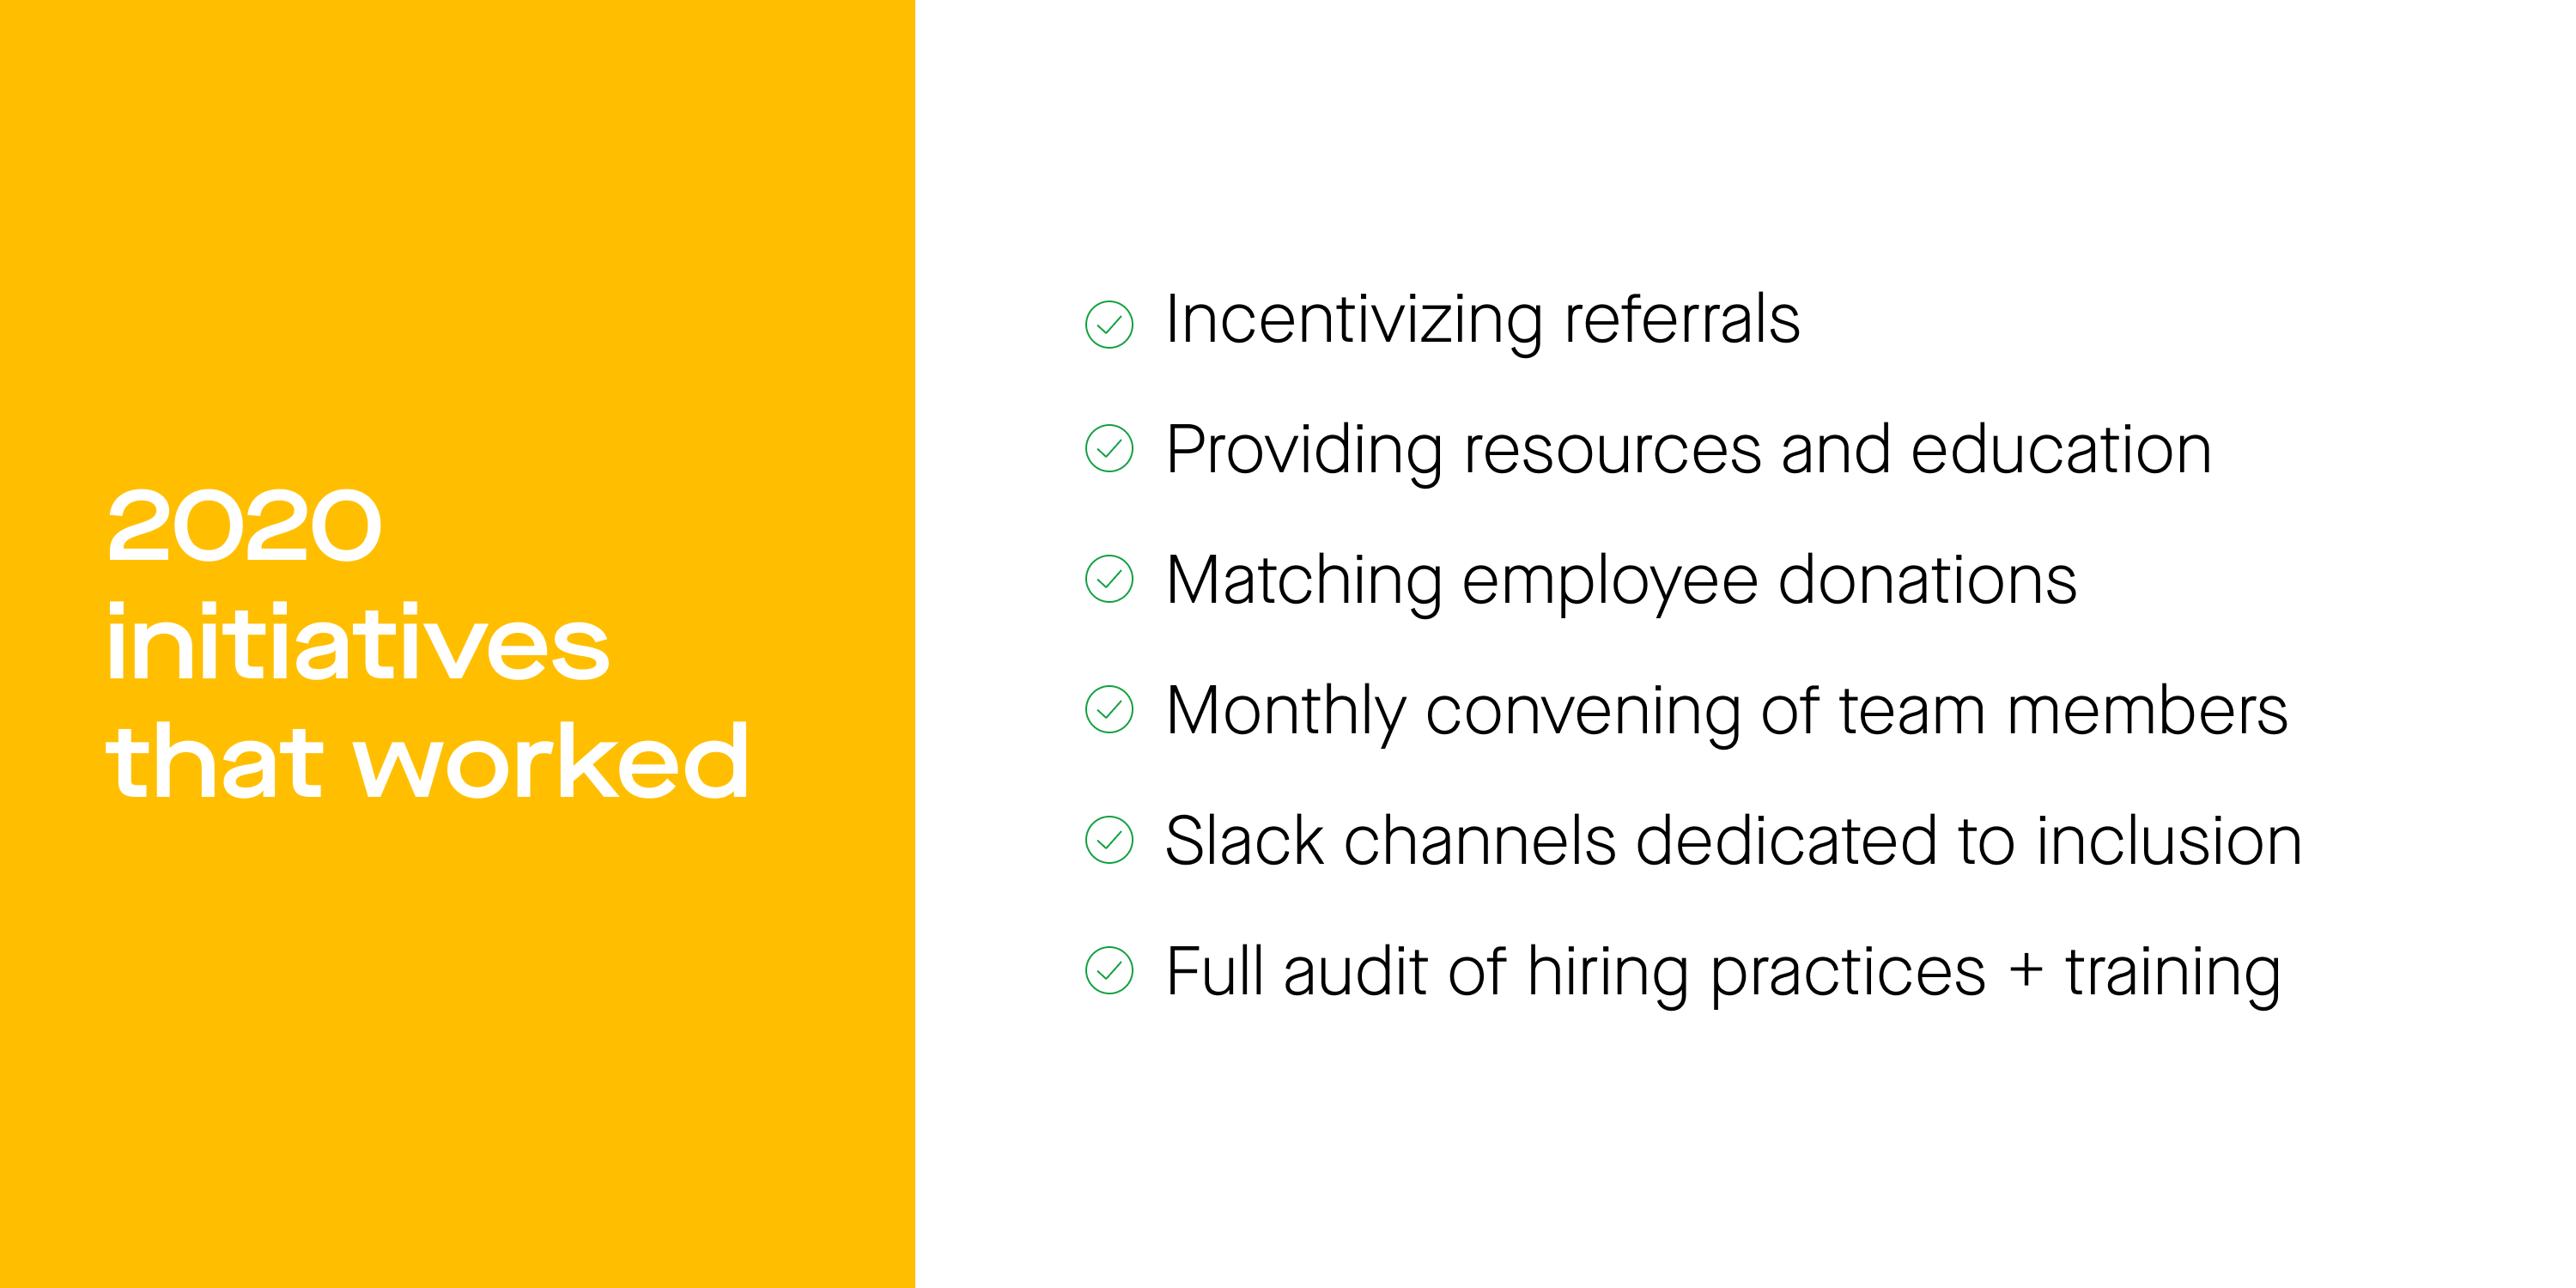 Image with white background on the right side and yellow background on the left side. Black text on the right side with the phrases: "Incentivizing referrals," "Providing resources and education," "Matching employee donations," "Monthly convening of team members," "Slack channels dedicated to inclusion," and "Full audit of hiring practices + training." White text against yellow background on the left side reads "2020 initiatives that worked"